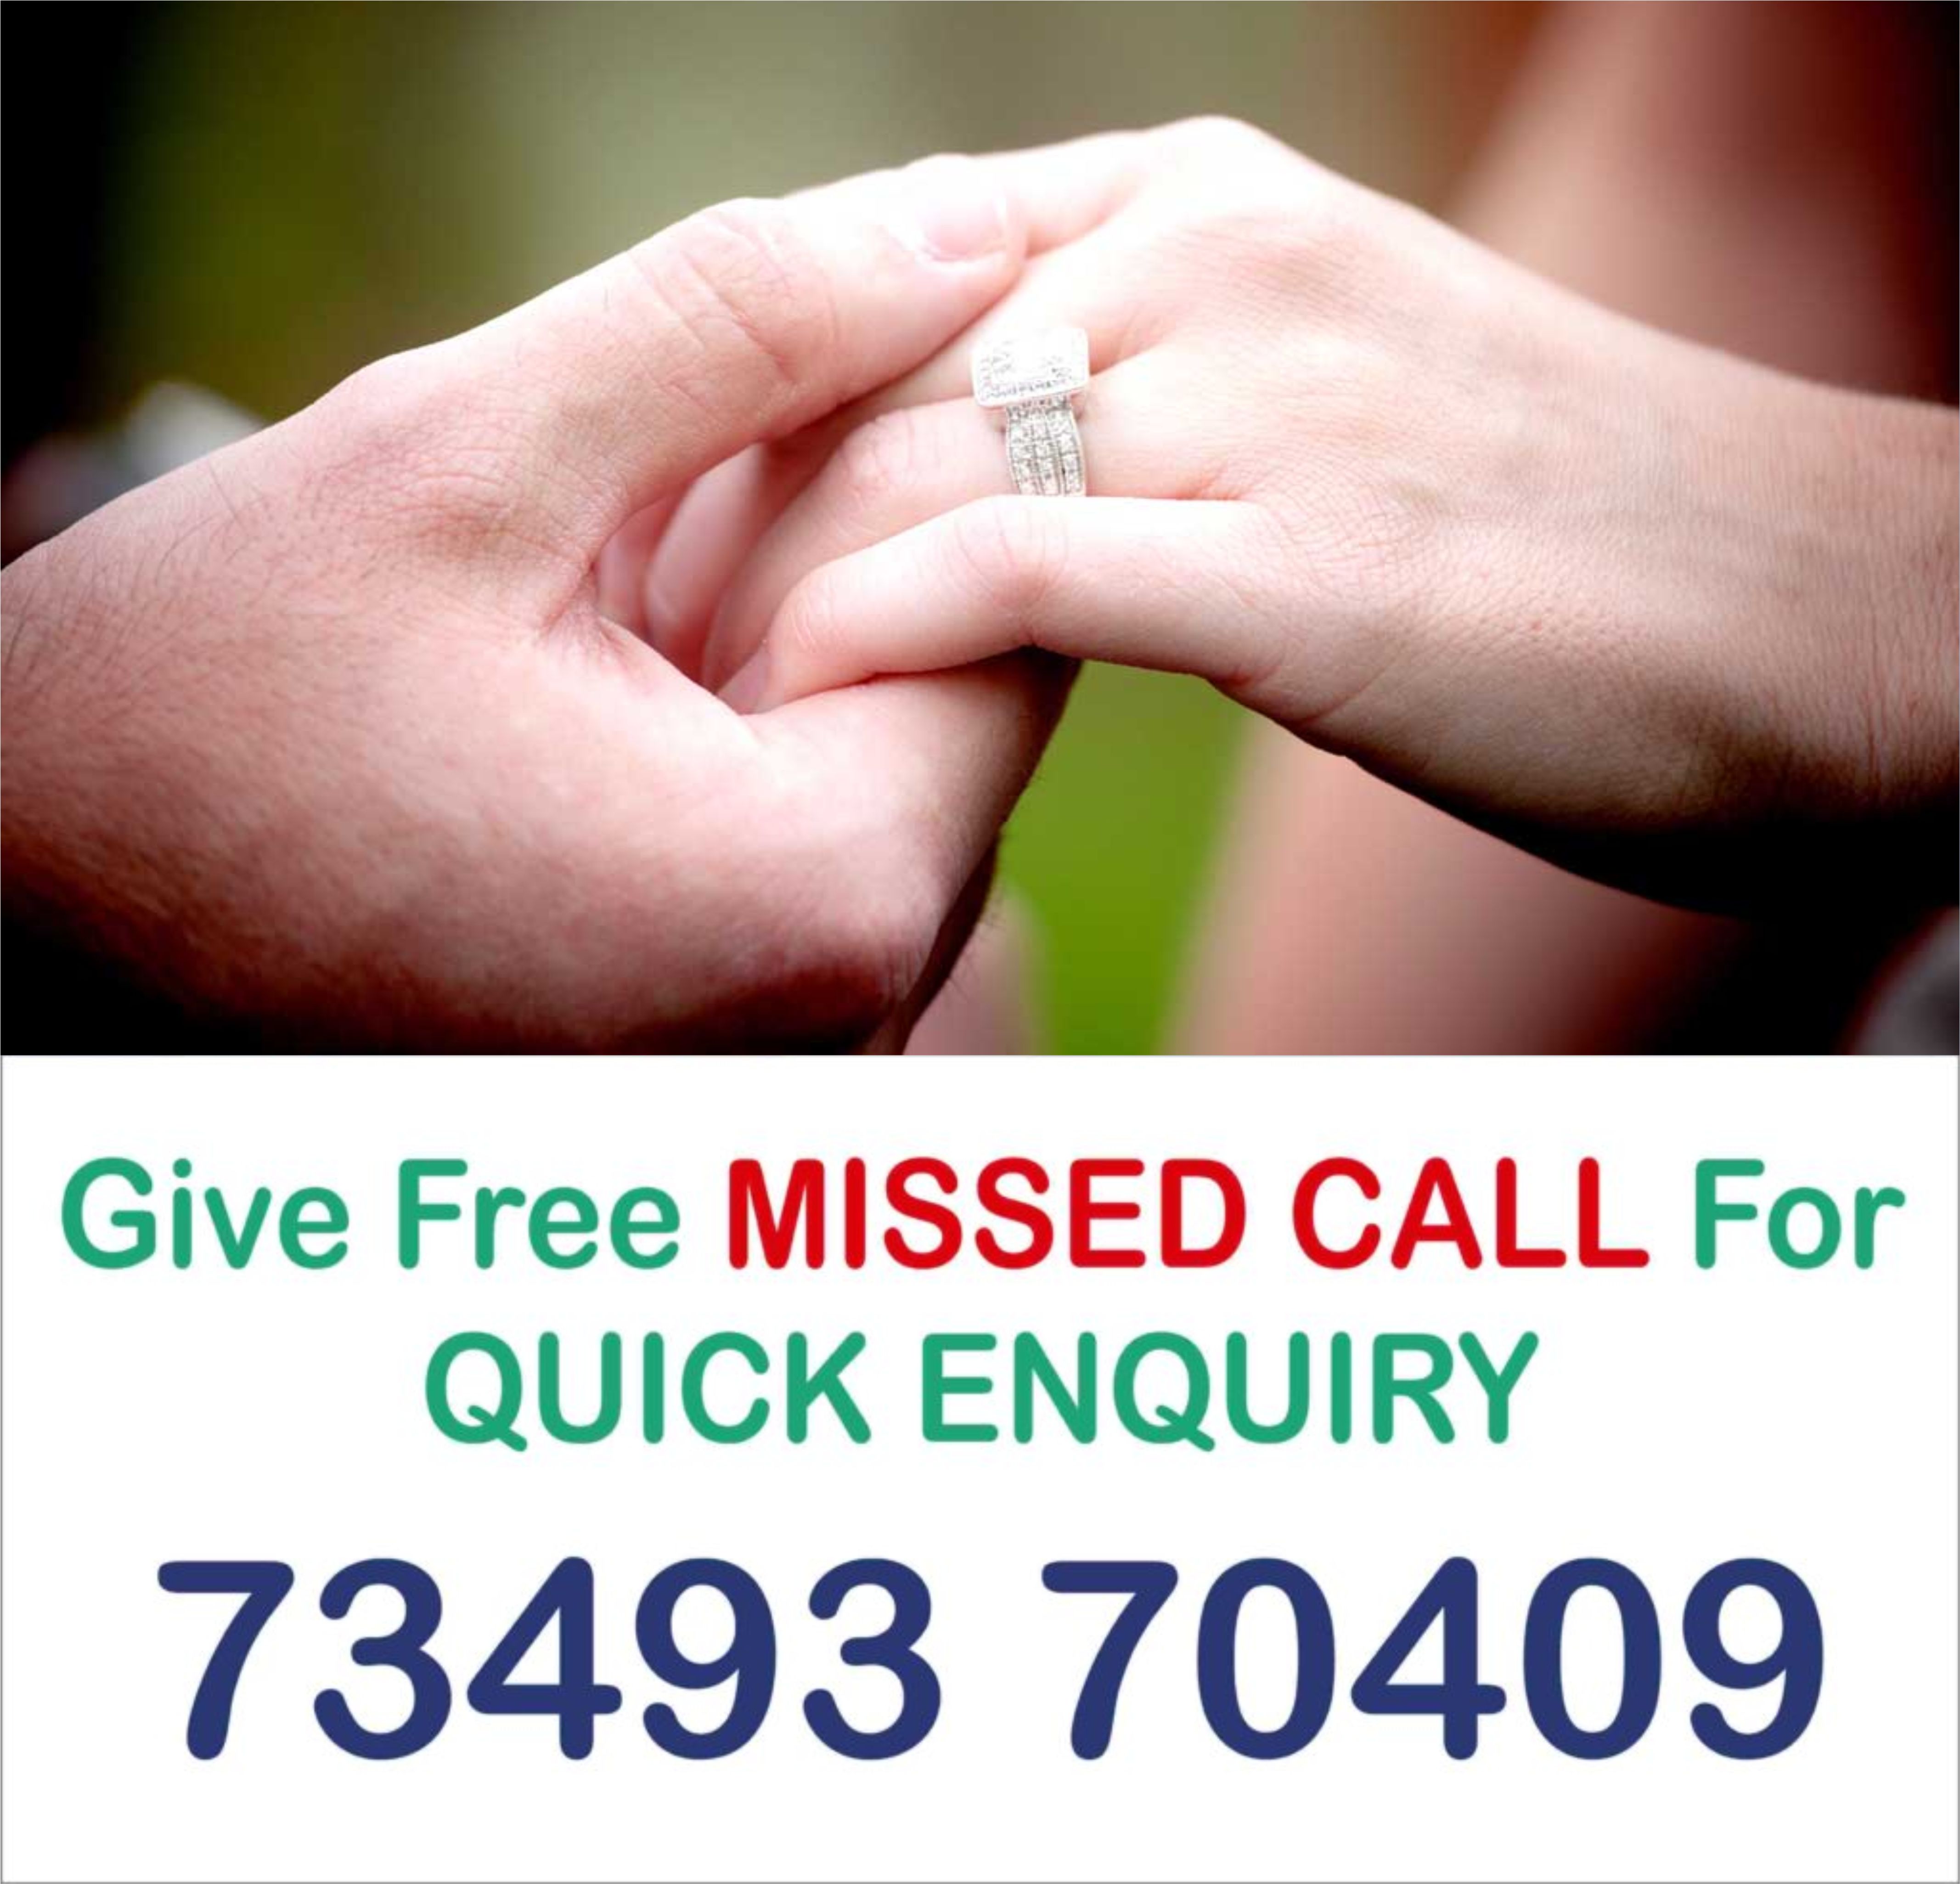 engagement organisers contact number Bangalore